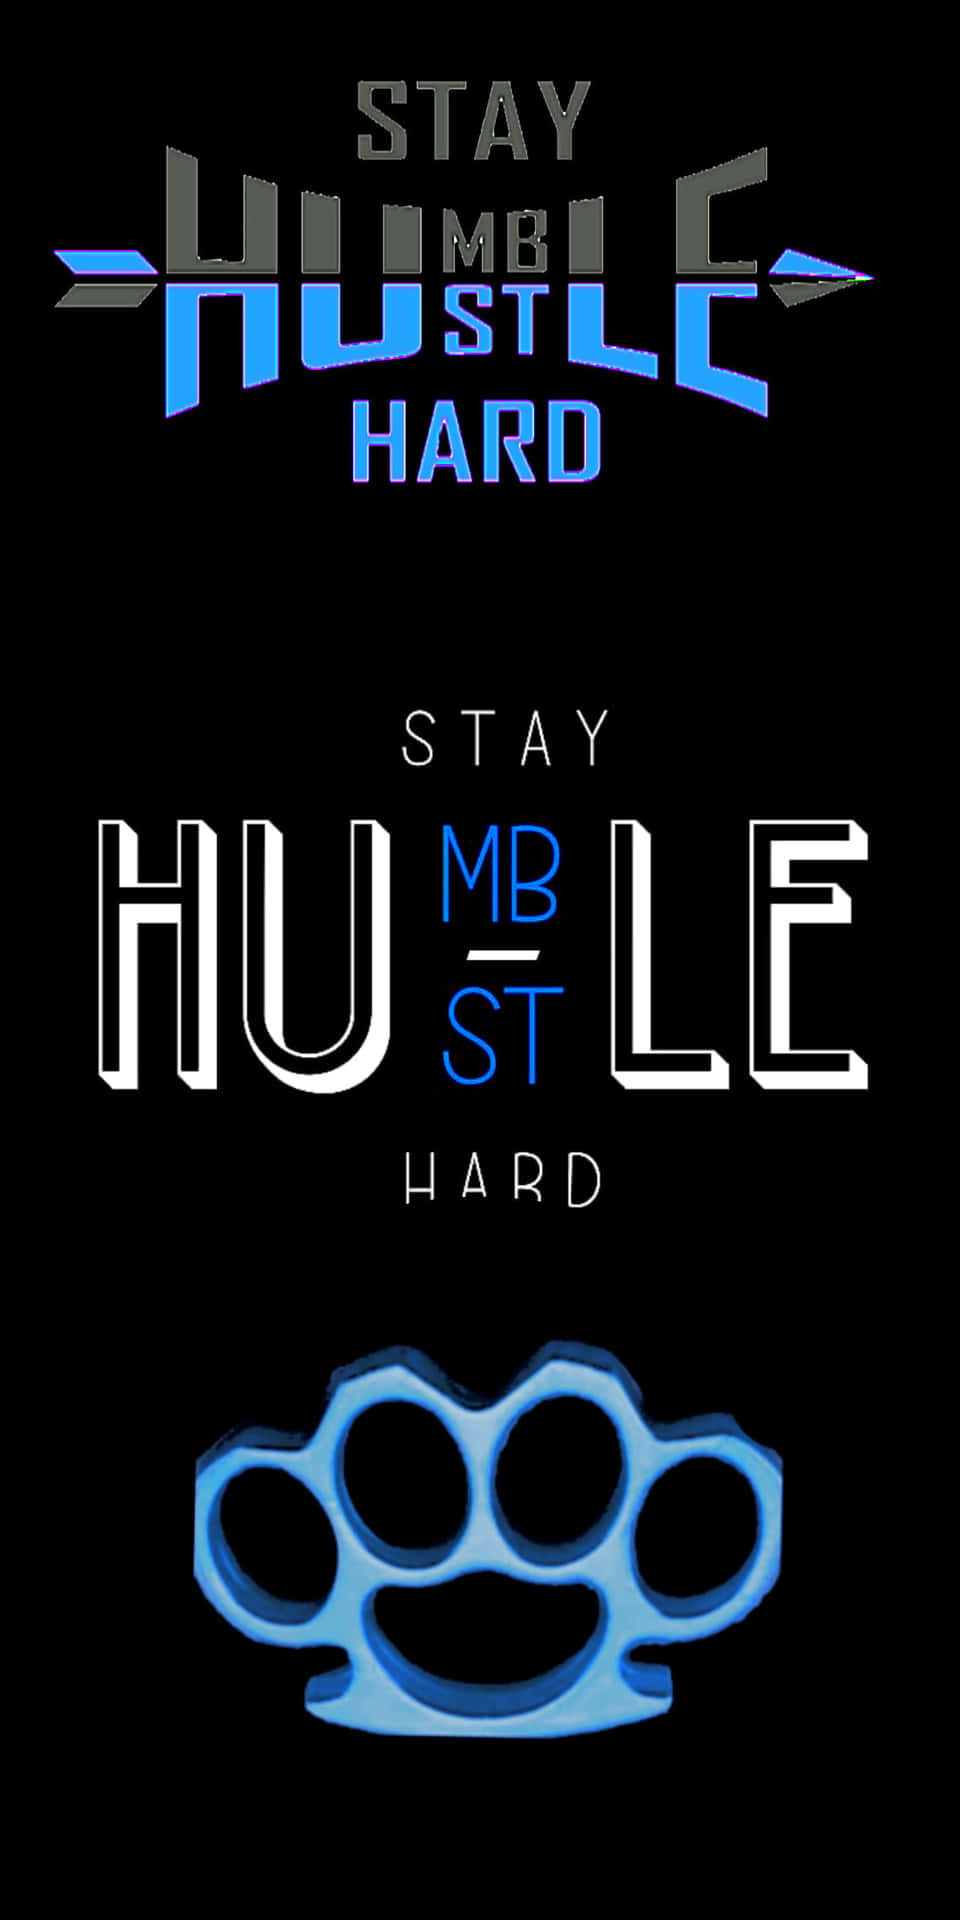 Work hard. Stay humble. — To Whom It May Concern